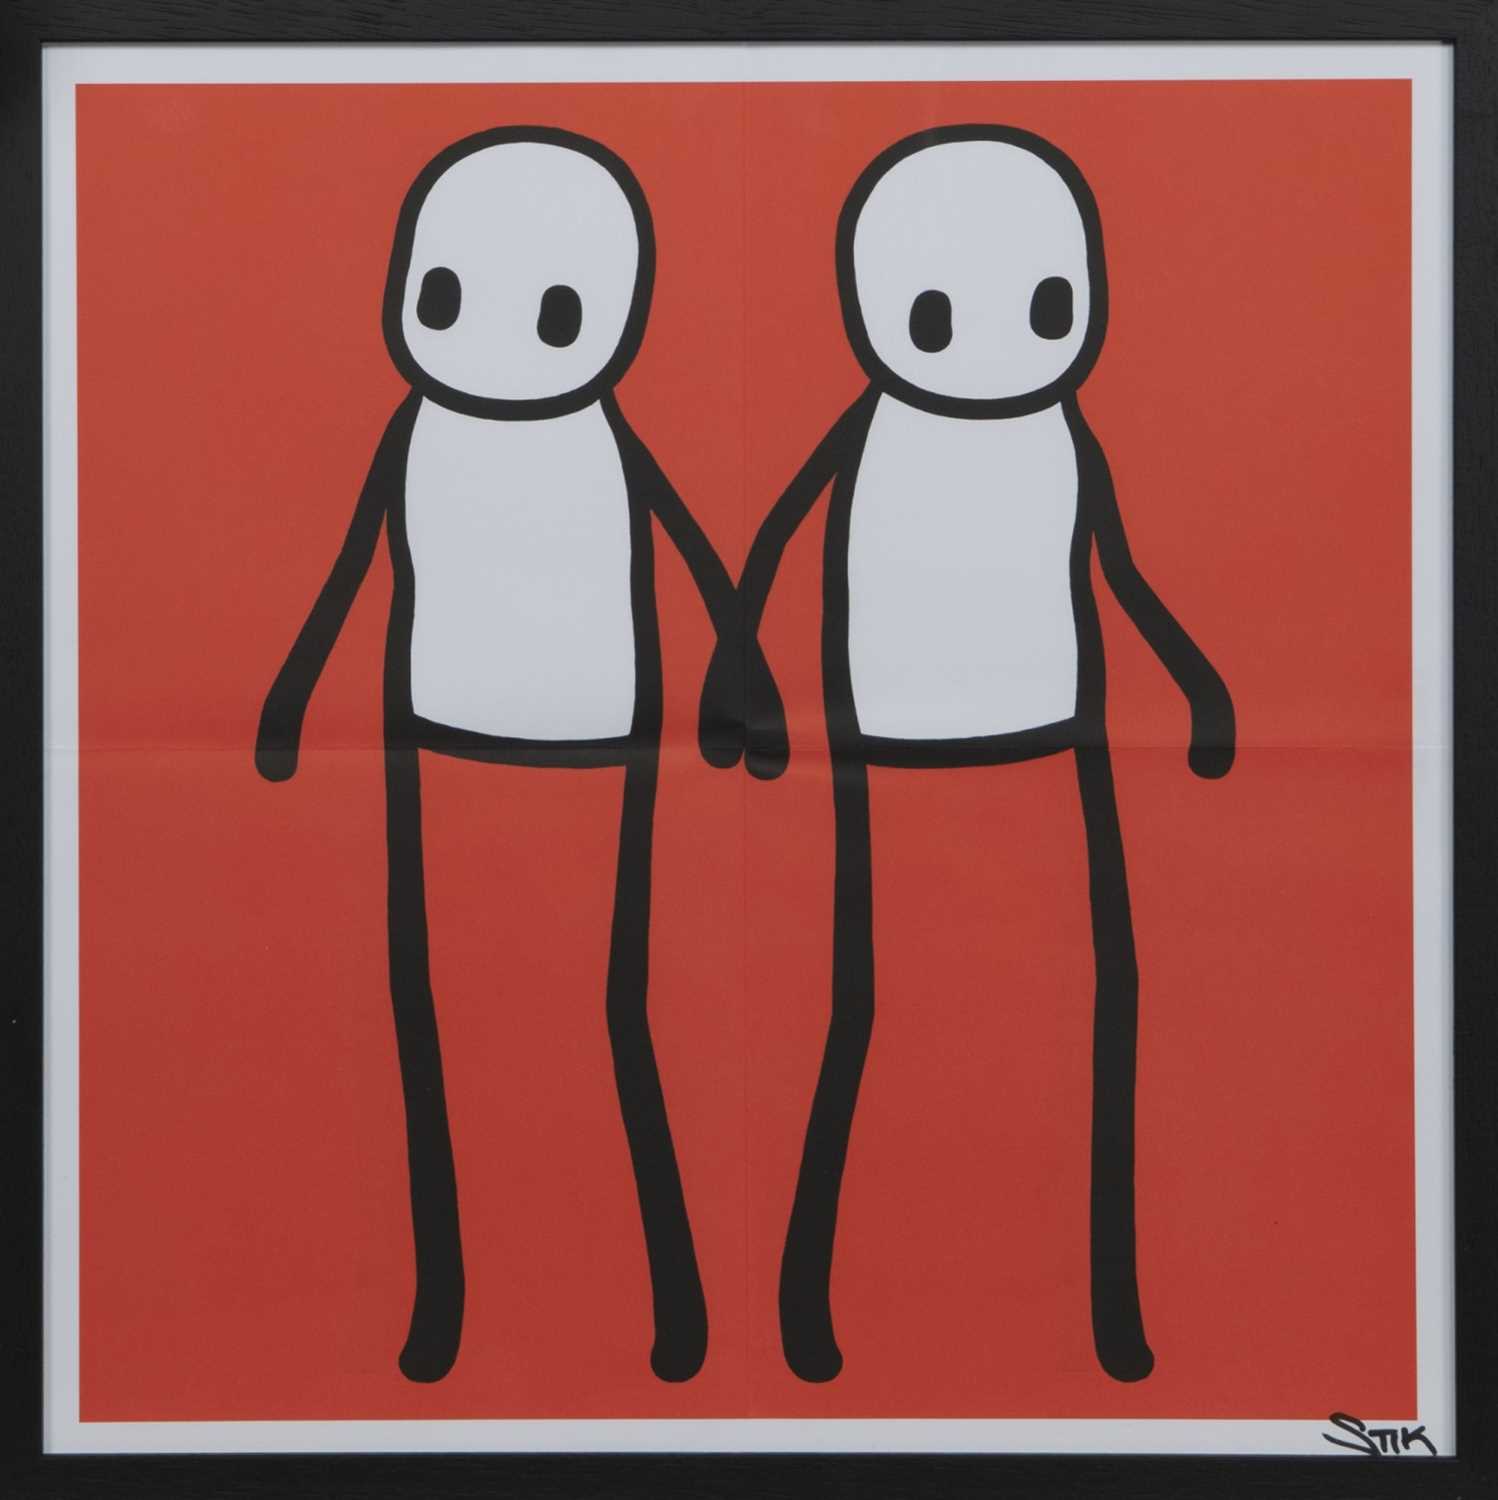 Lot 159 - HOLDING HANDS (RED, ORANGE, YELLOW, BLUE & TEAL), LITHOGRAPHS BY STIK